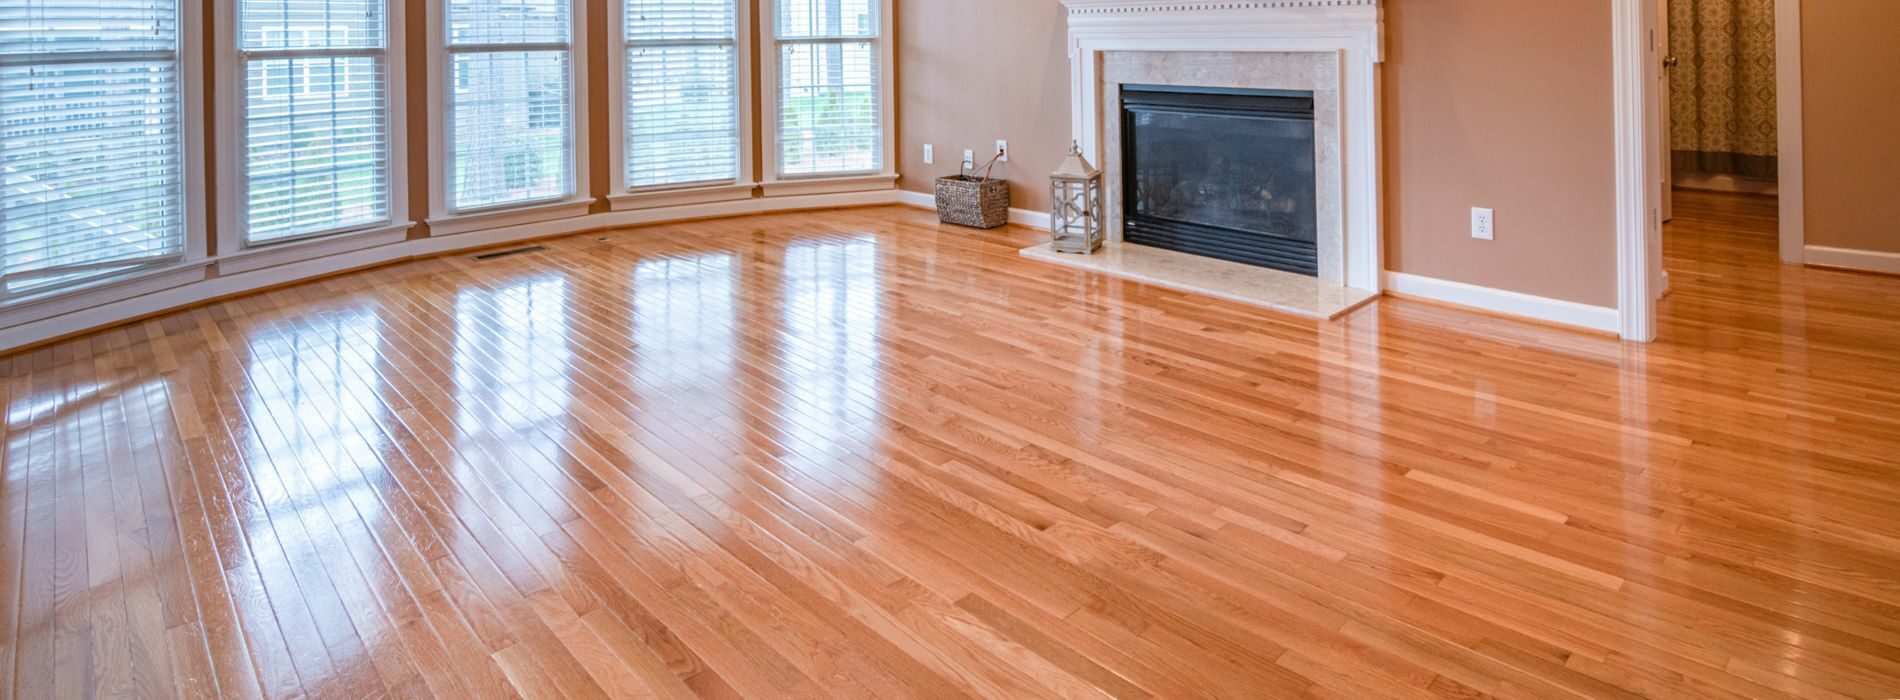 Transformed Engineered Oak Floors in Mary Cray BR5: Witness the expertise of Mr Sander® in action. Meticulously restored and enhanced with a warm mid-oak stain, these floors shine with Junckers Strong satin finish, ensuring lasting durability and timeless beauty.